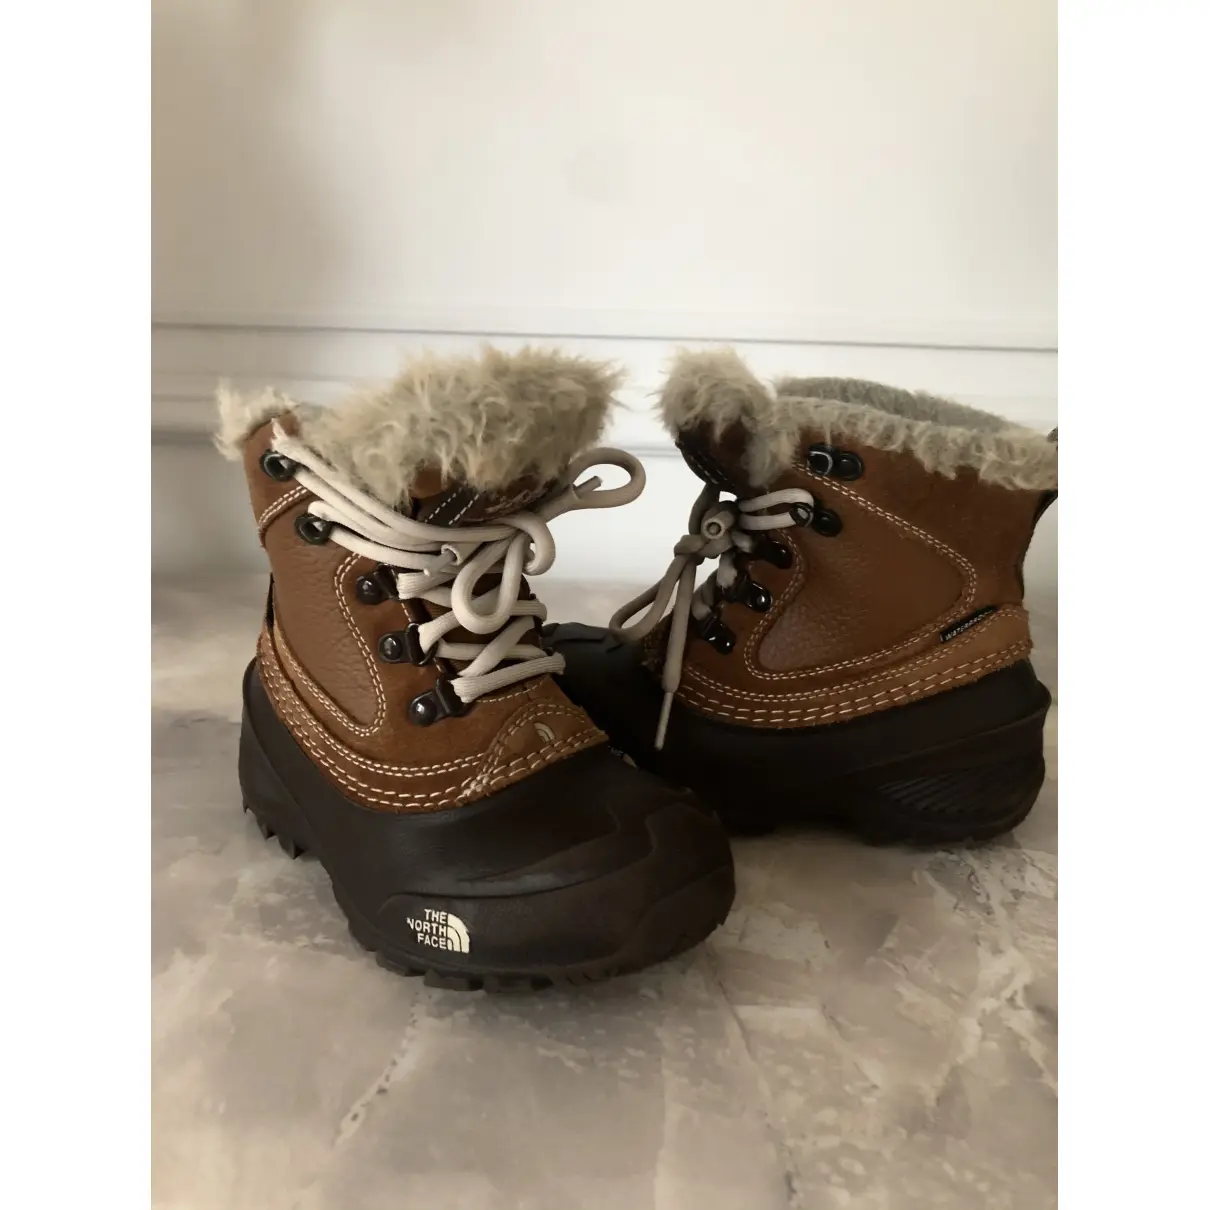 Buy The North Face Leather boots online